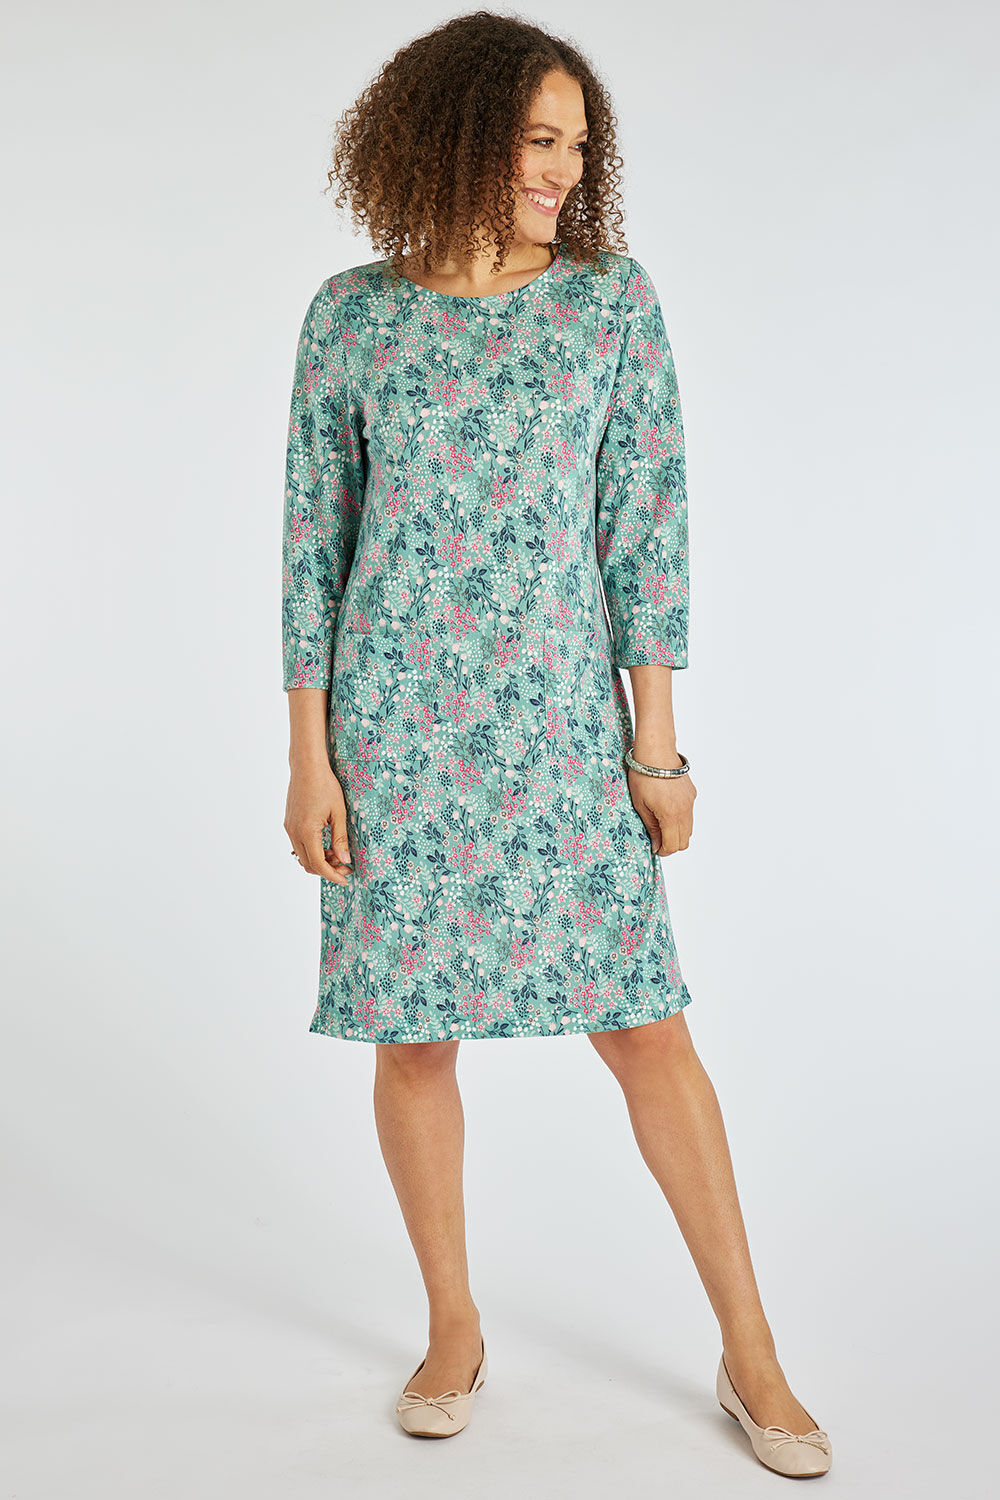 Bonmarche Green Ditsy Floral Print Soft Touch Dress With Pocket Detail, Size: 12